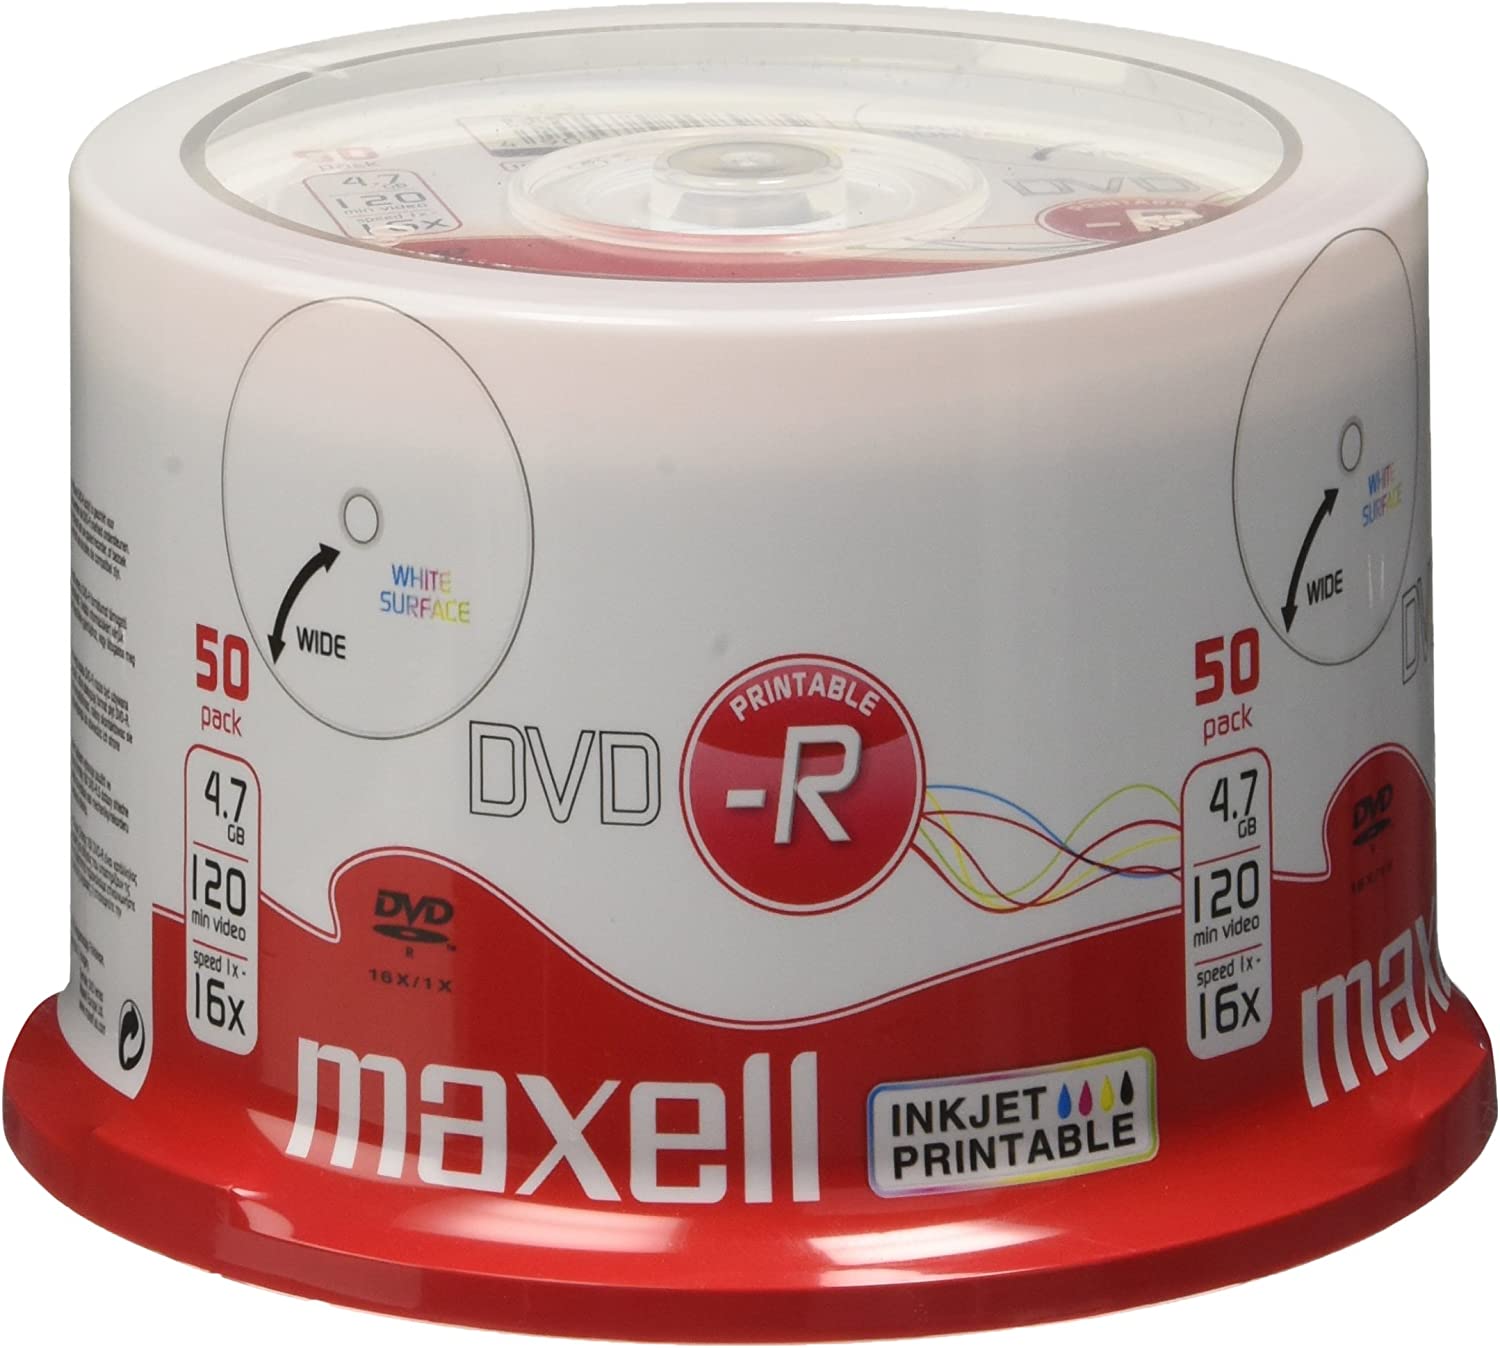 Maxell 16x DVD-R Printable White 4.7GB 120Min 50 pack Spindle | 275701